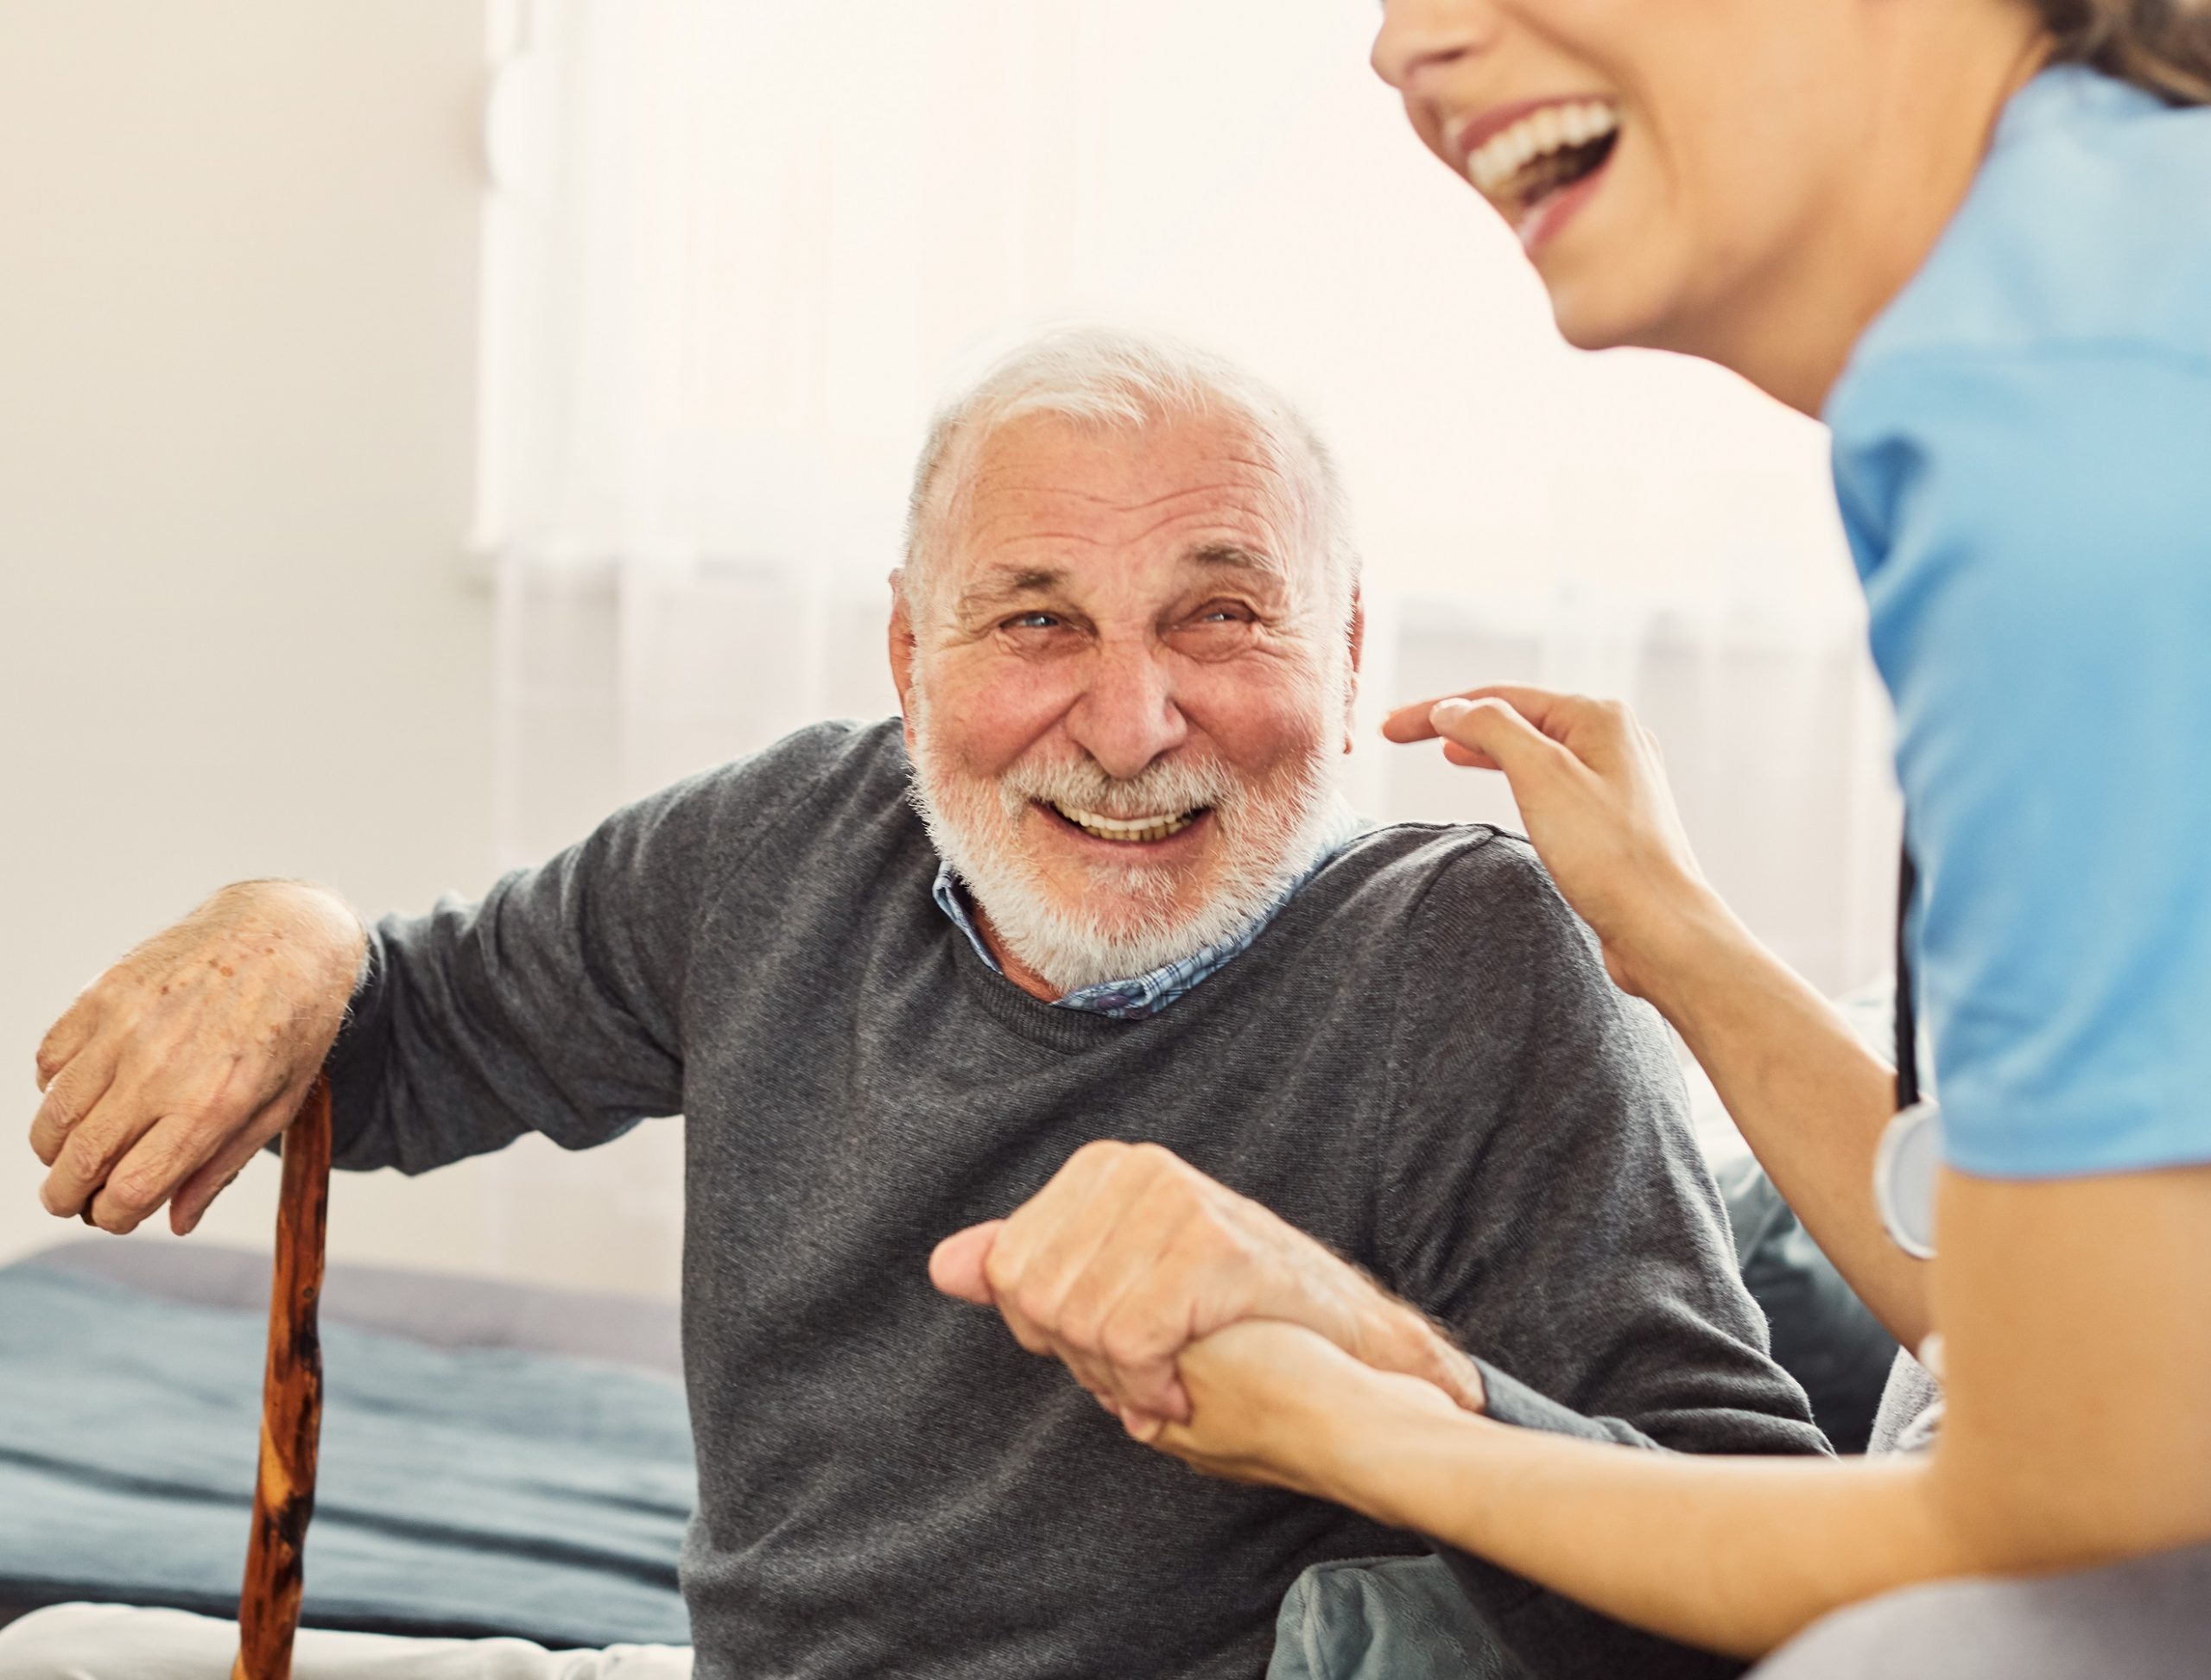 An elderly man with a walking stick and a young caregiver are laughing